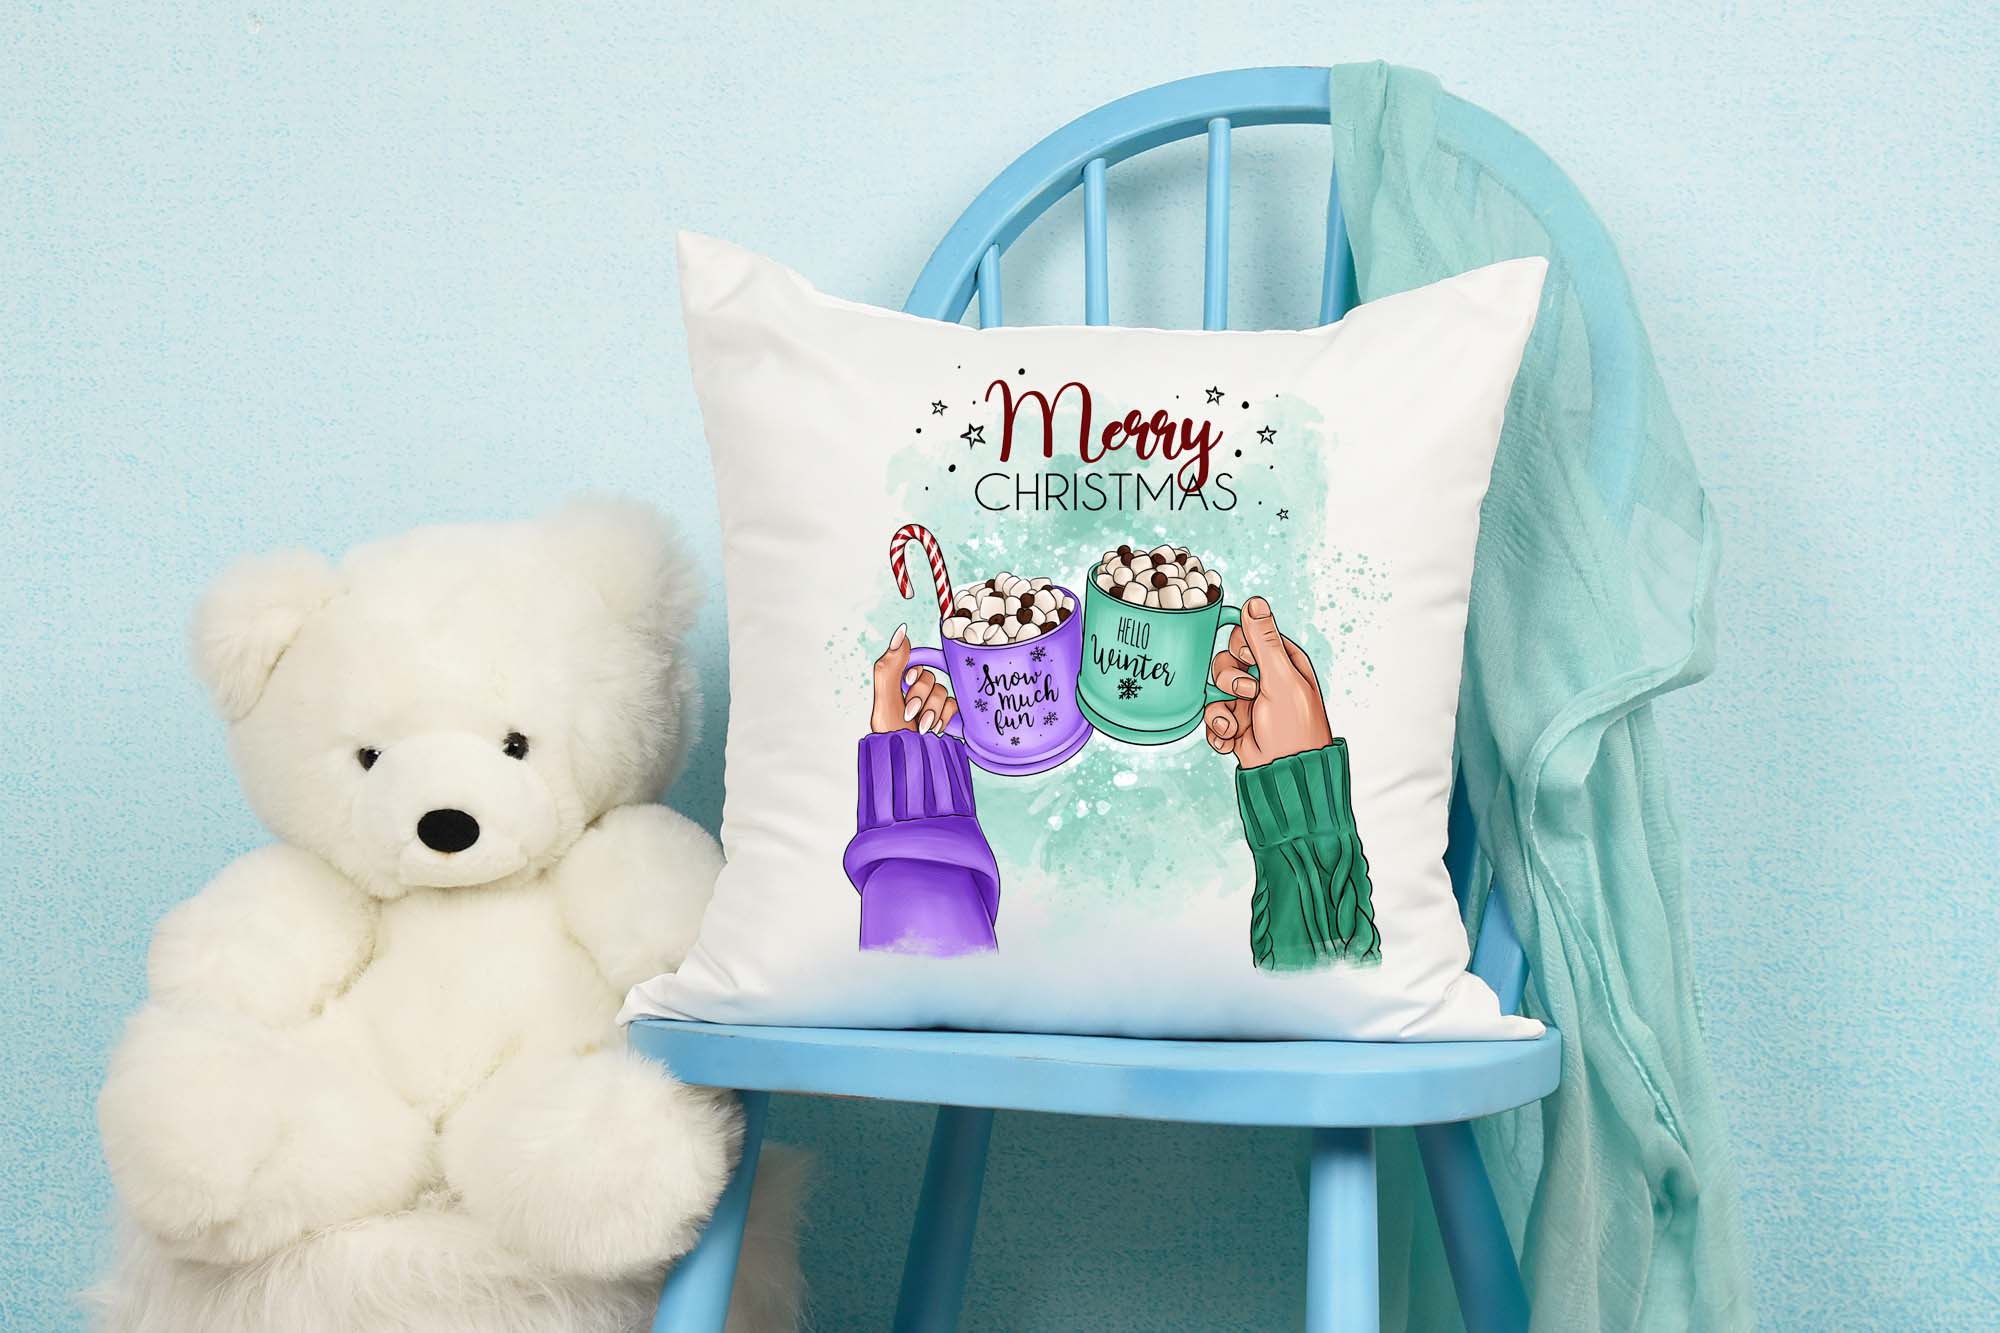 Сouple With Mugs Winter Illustration Pillow On A Chair.